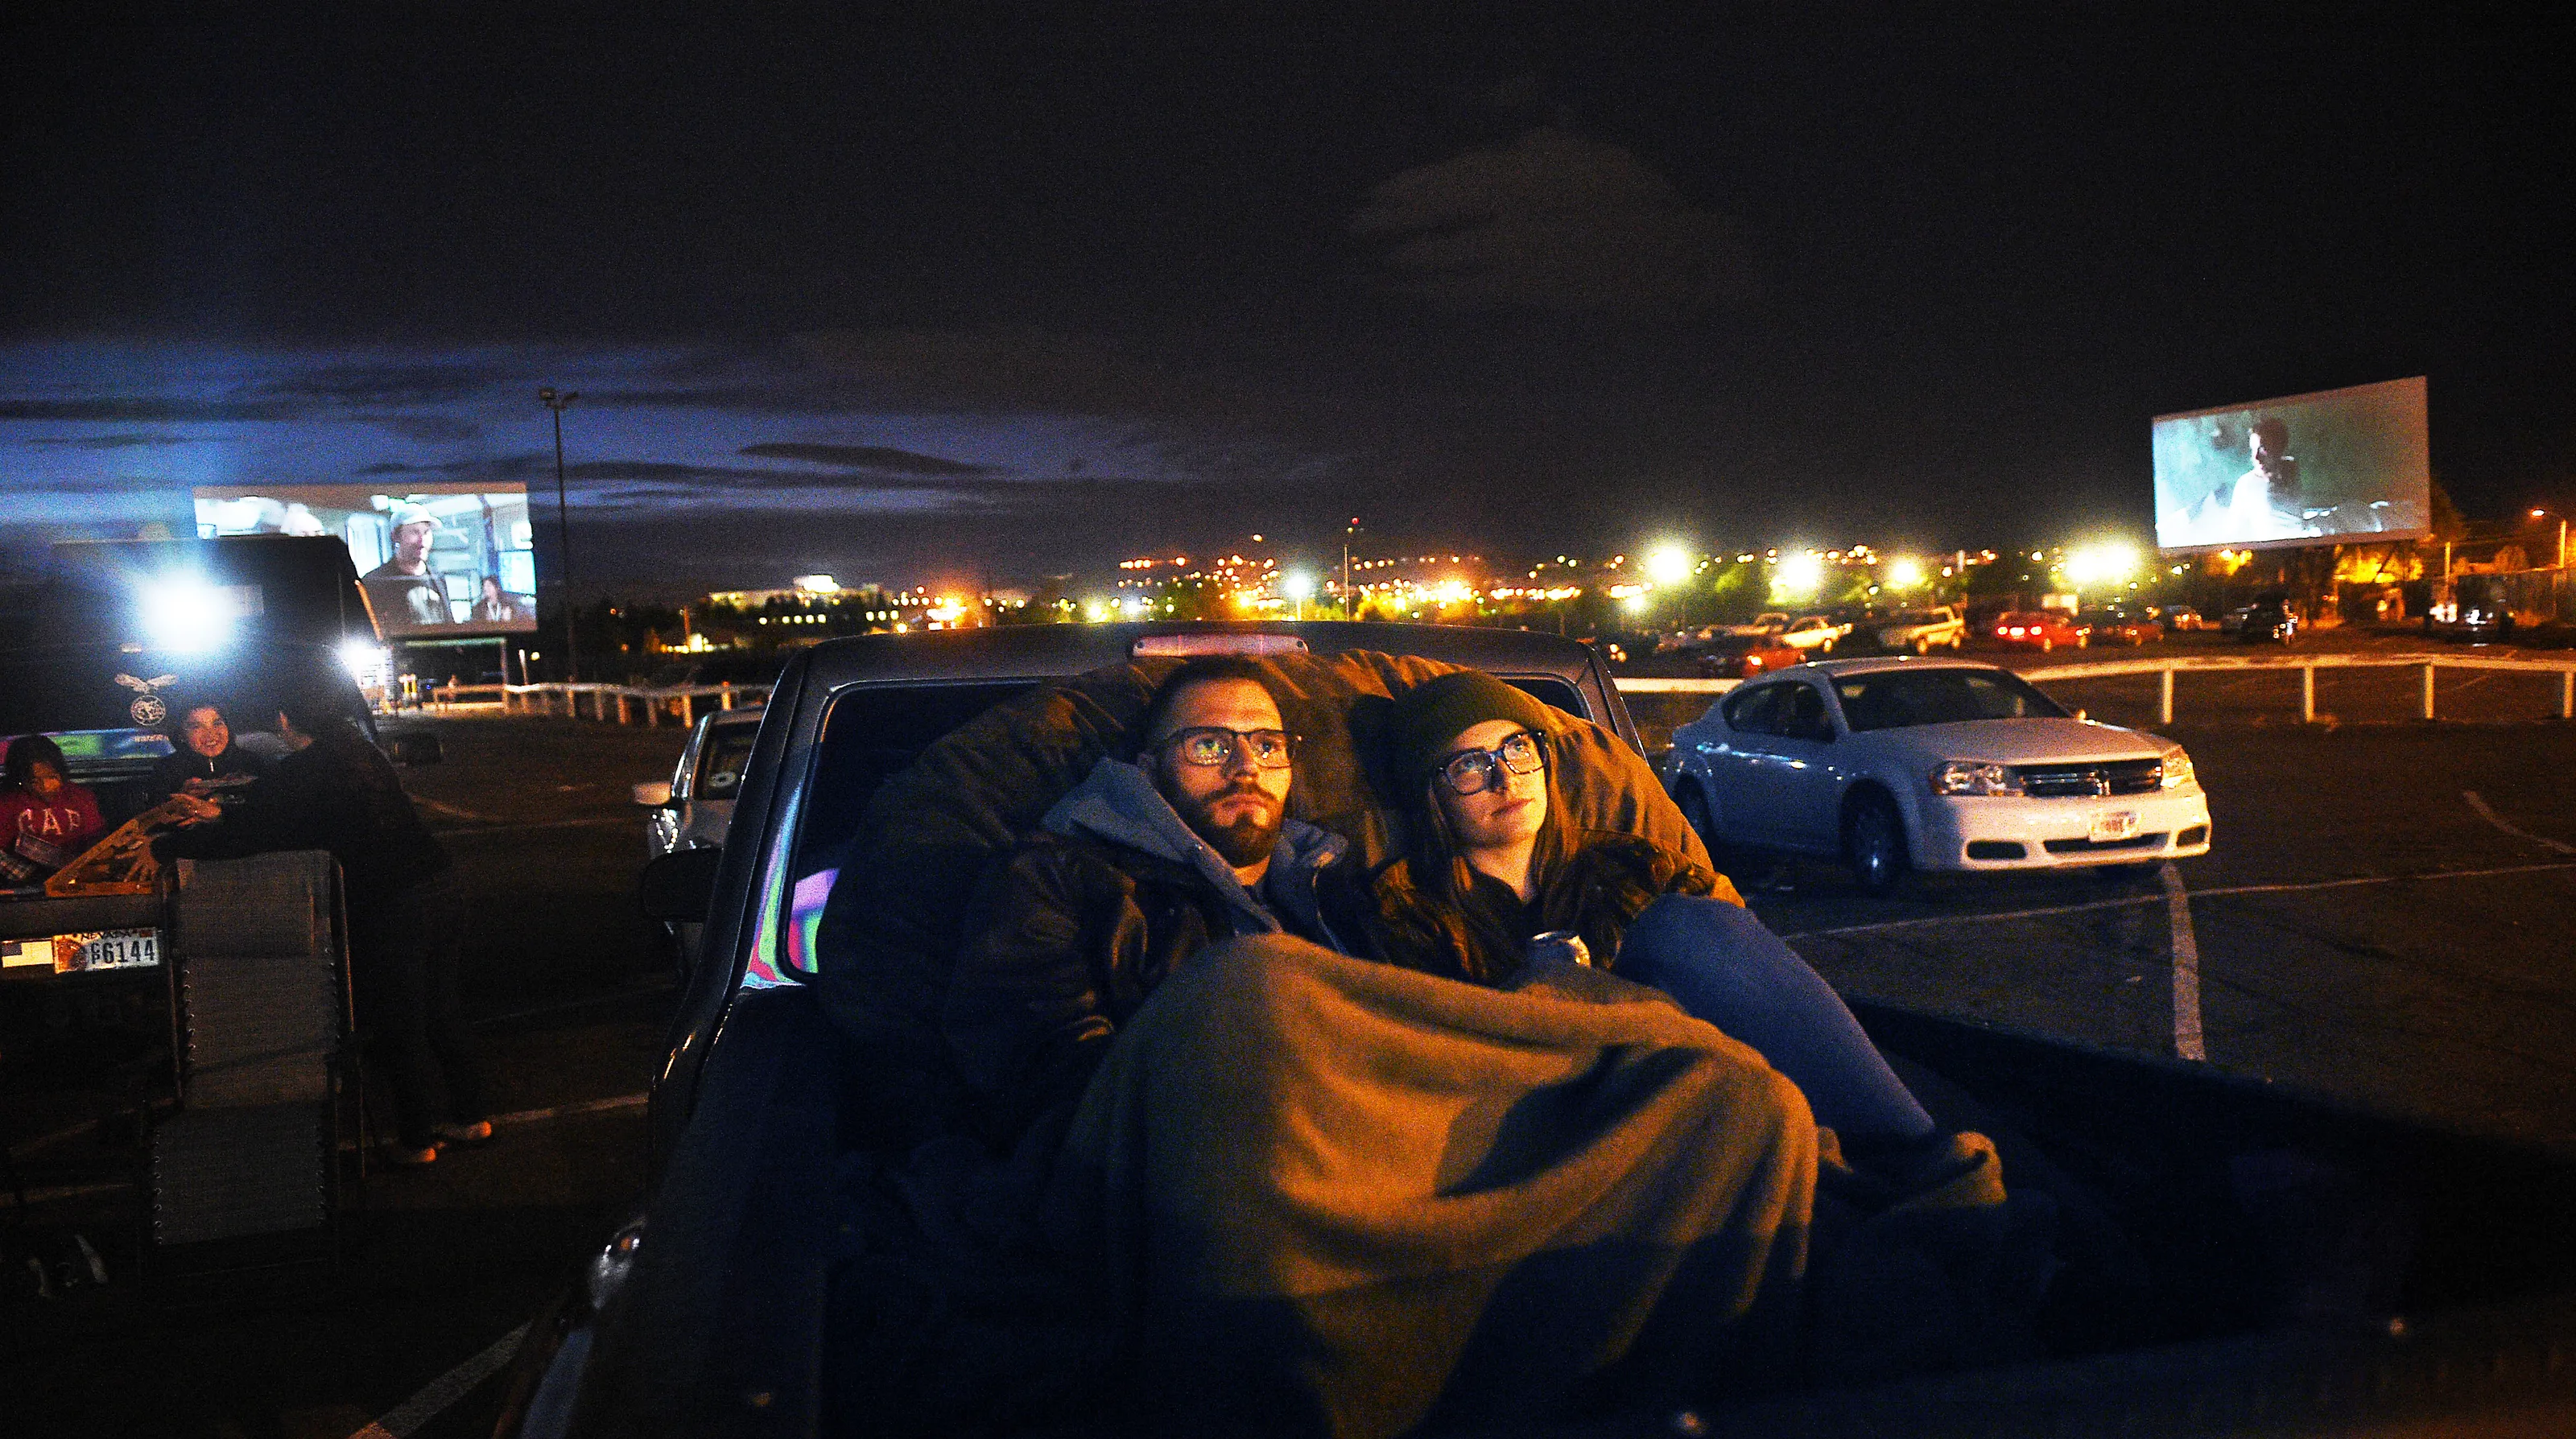 Drive-In Movie Nights